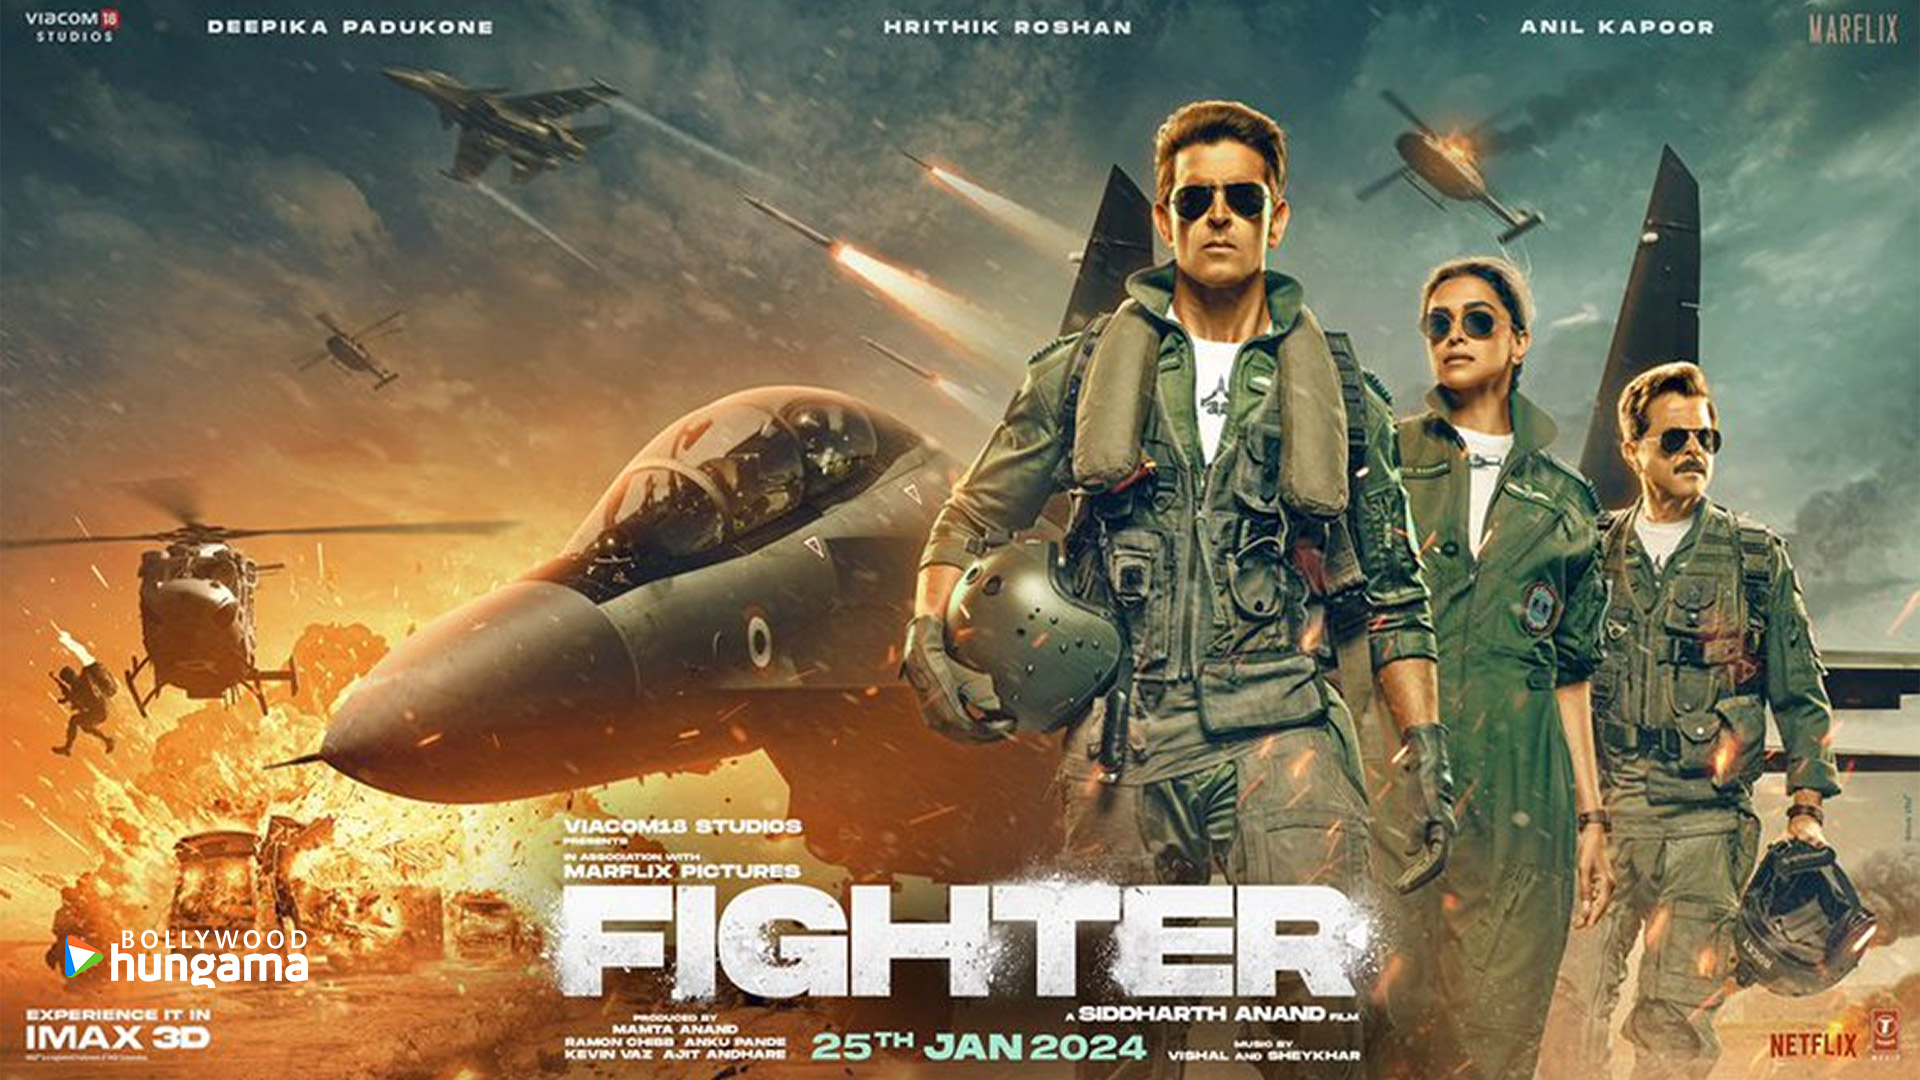 Fighter Box Office Collection Drop To Single Digits After Three days